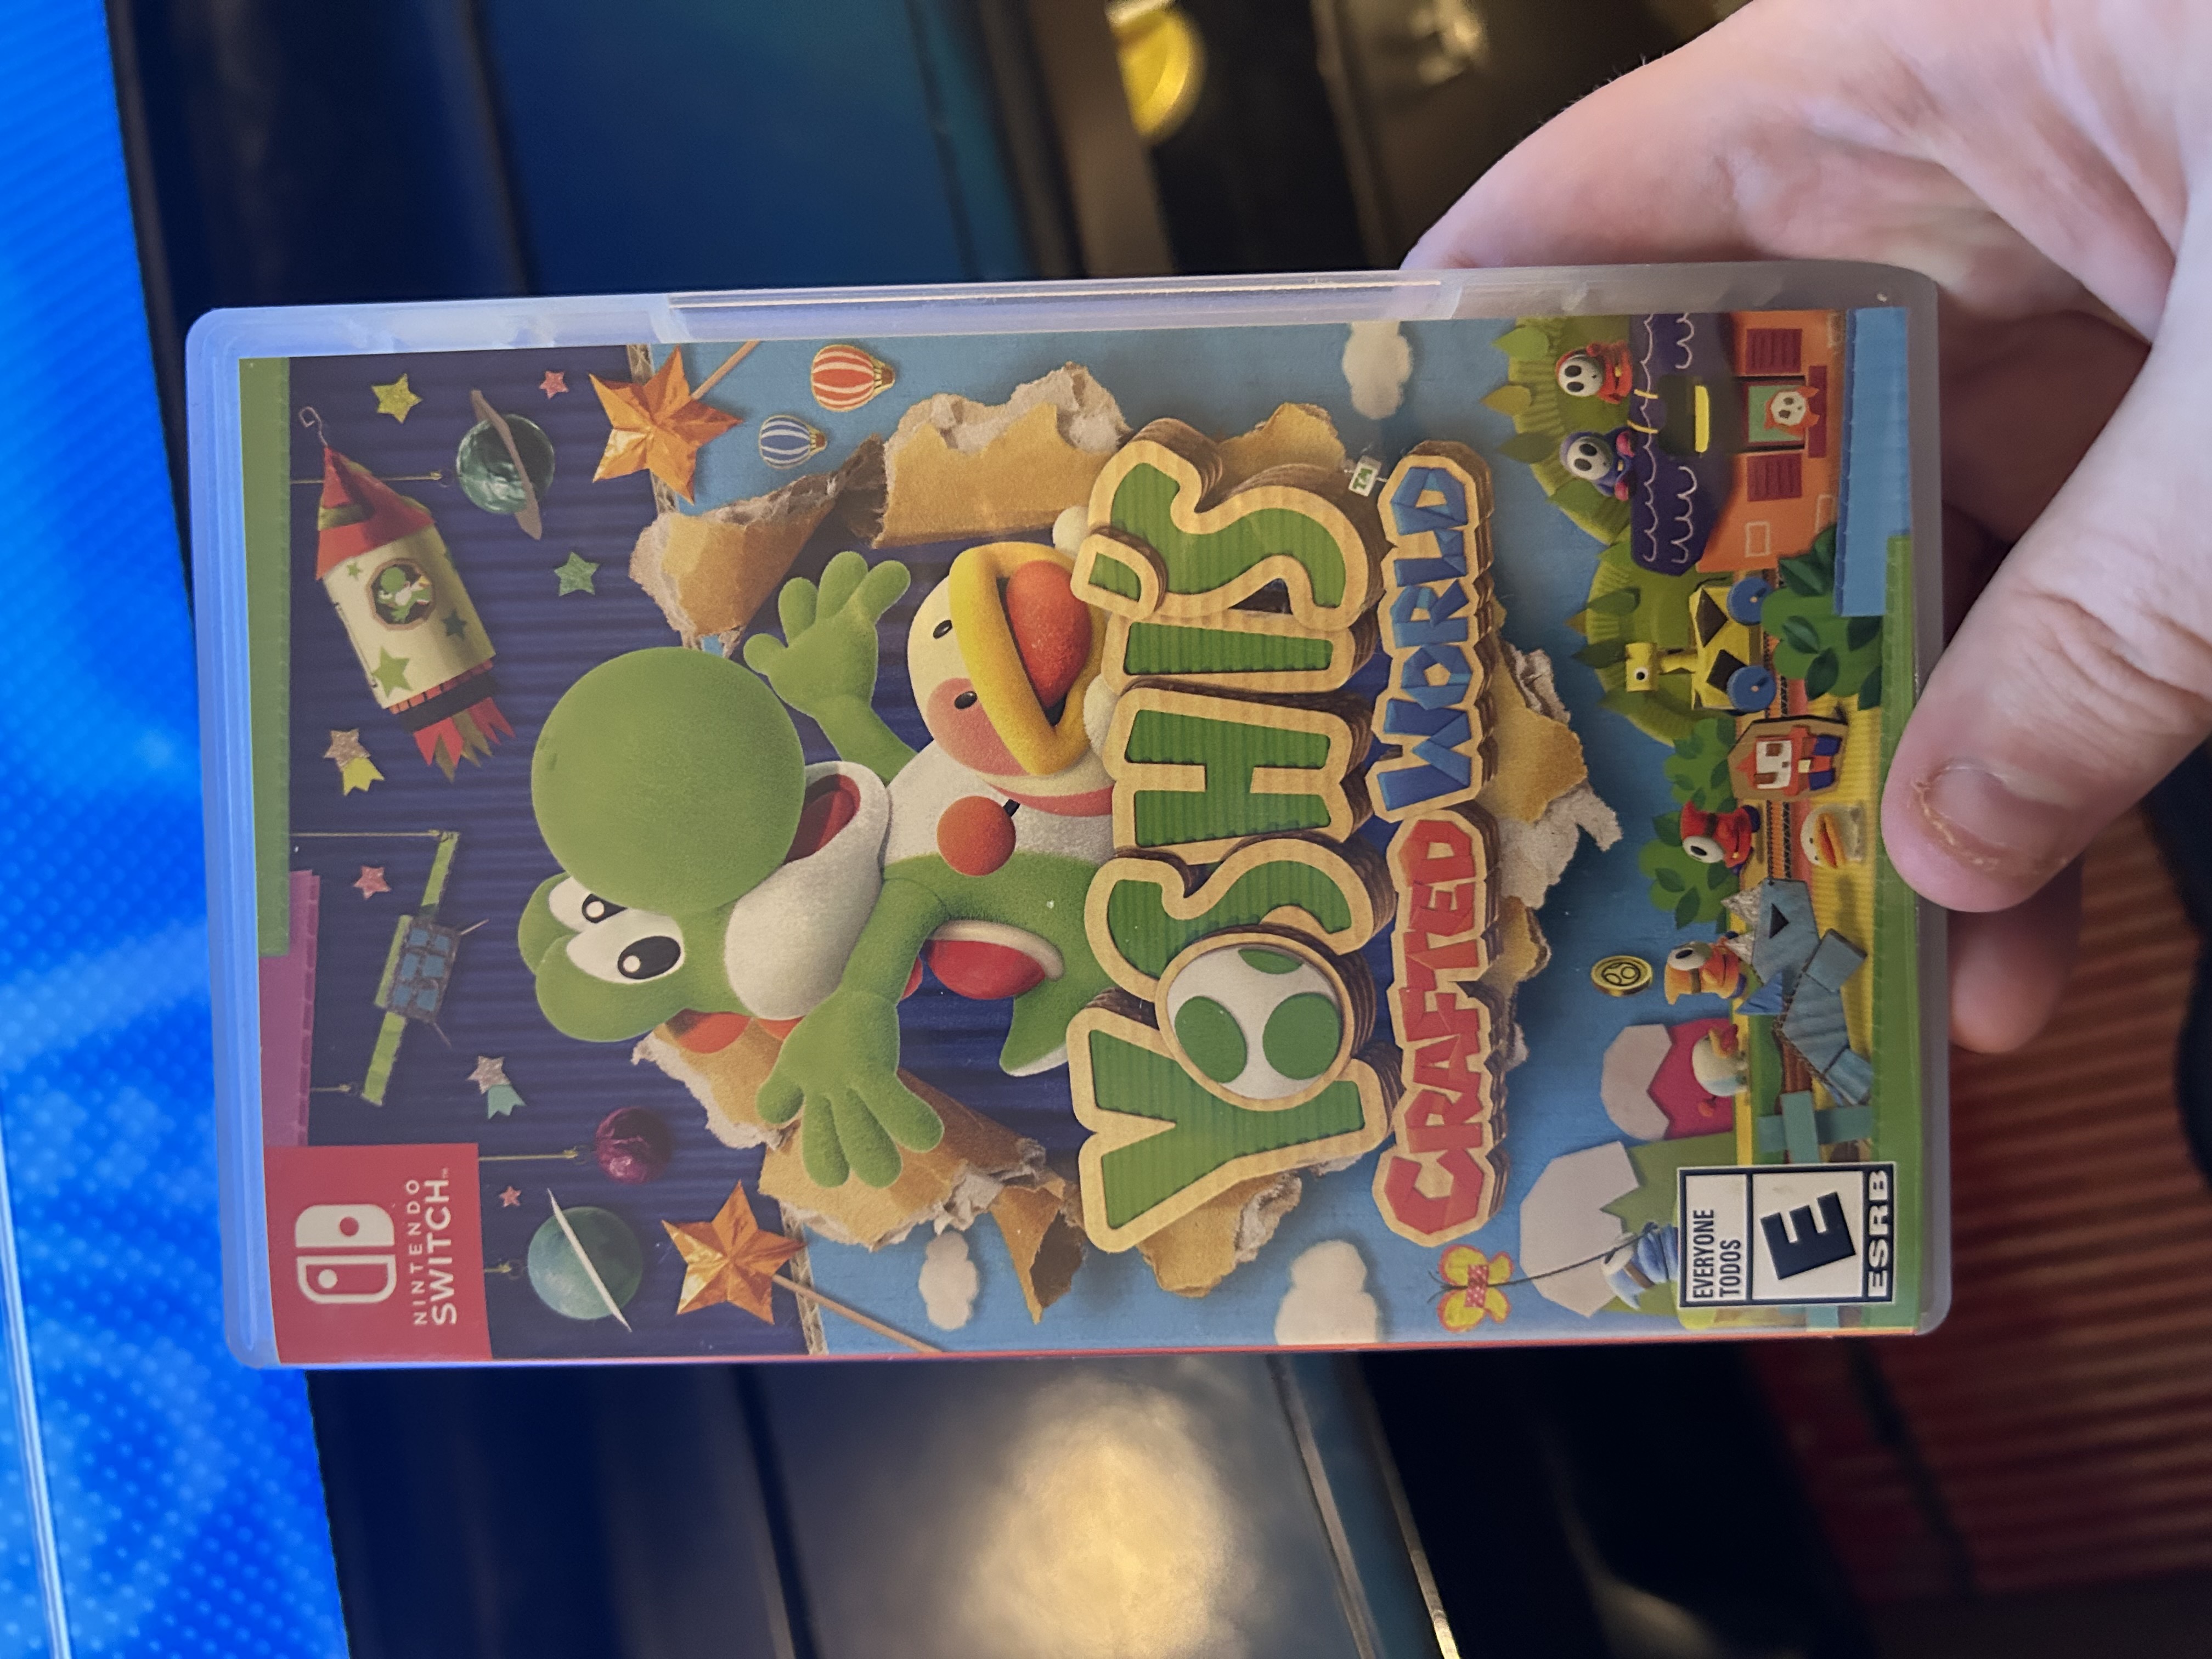 Yoshis Crafted World - Nintendo Switch by NGMRX on DeviantArt